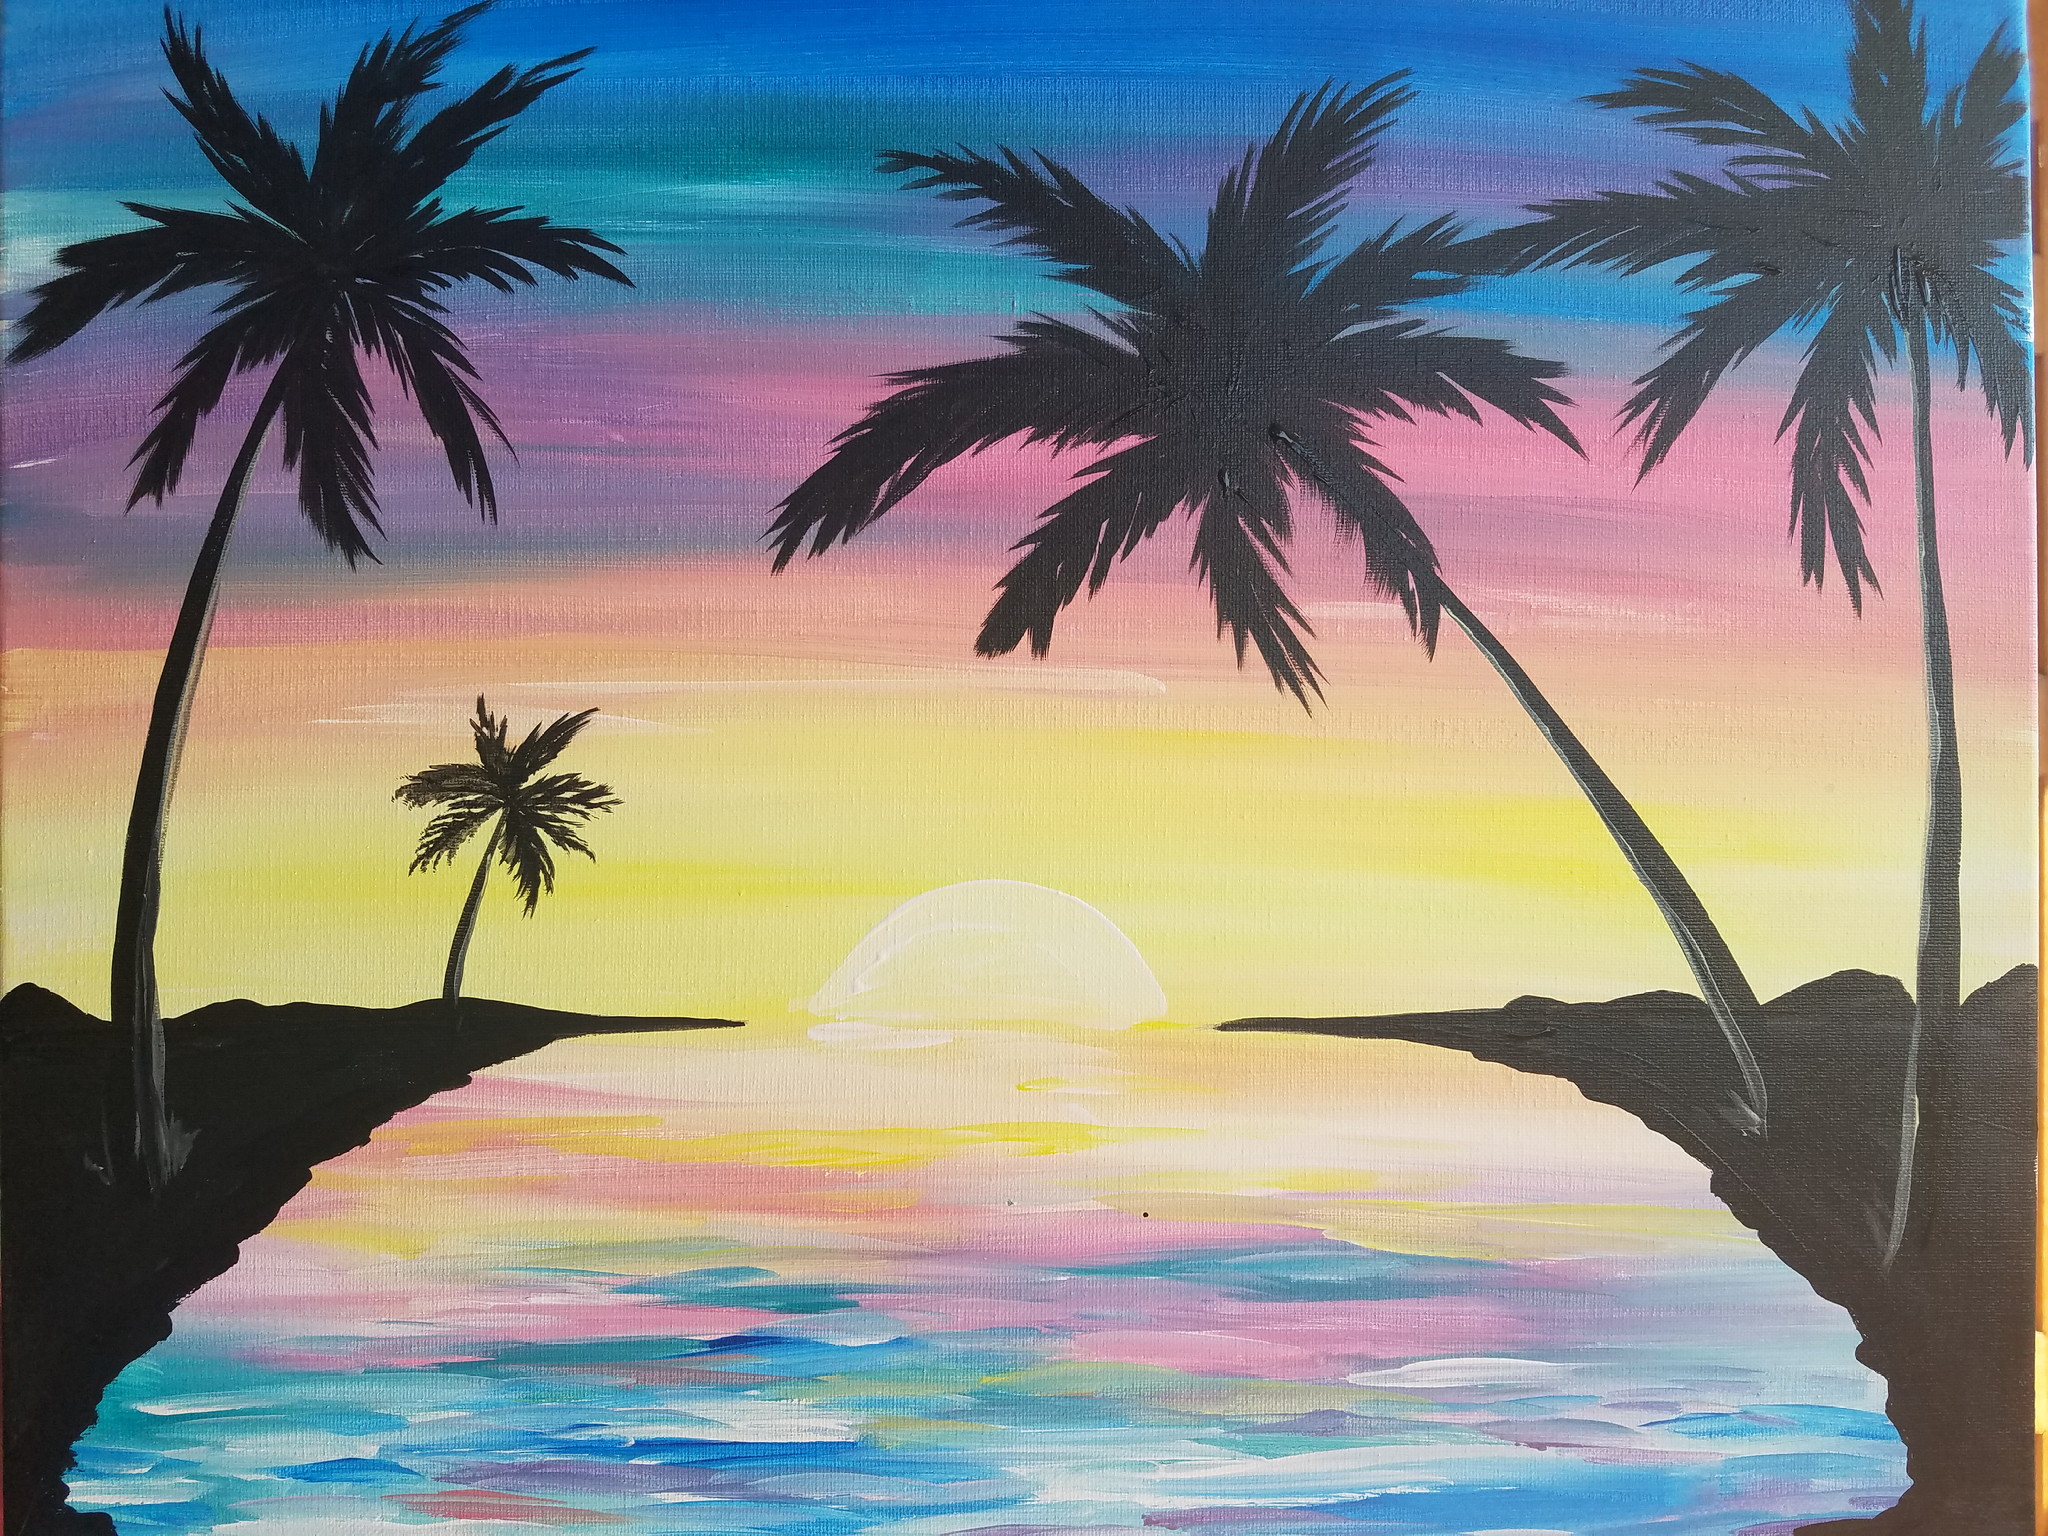 We will be painting Spring Sunset! I will step by step teach you how to recreate this beautiful masterpiece!